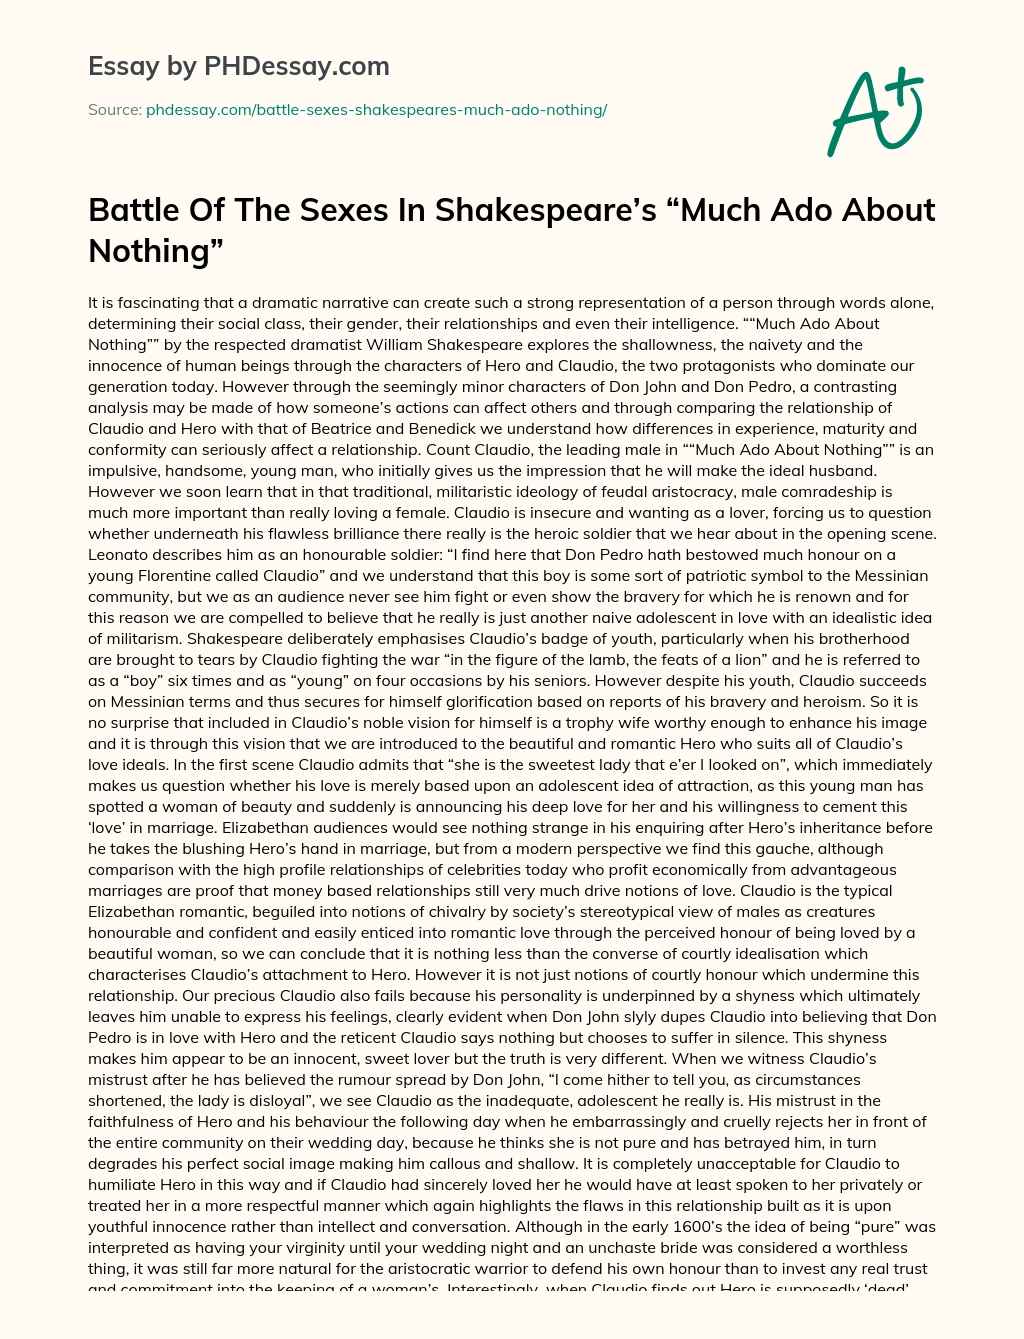 Реферат: Othello And Much Ado About Nothing Essay